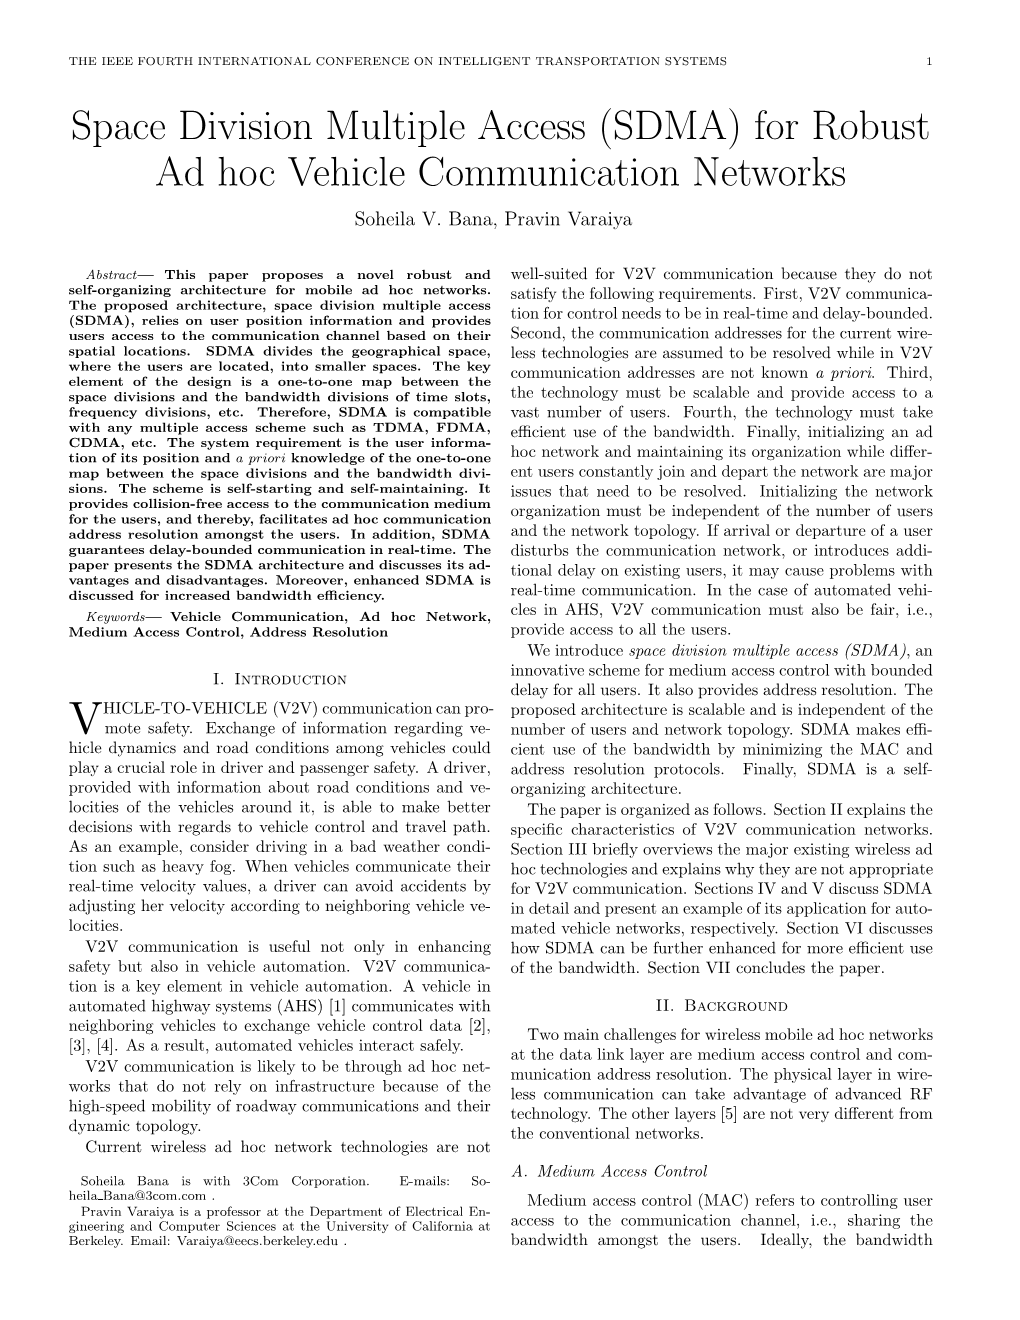 Space Division Multiple Access (SDMA) for Robust Ad Hoc Vehicle Communication Networks Soheila V